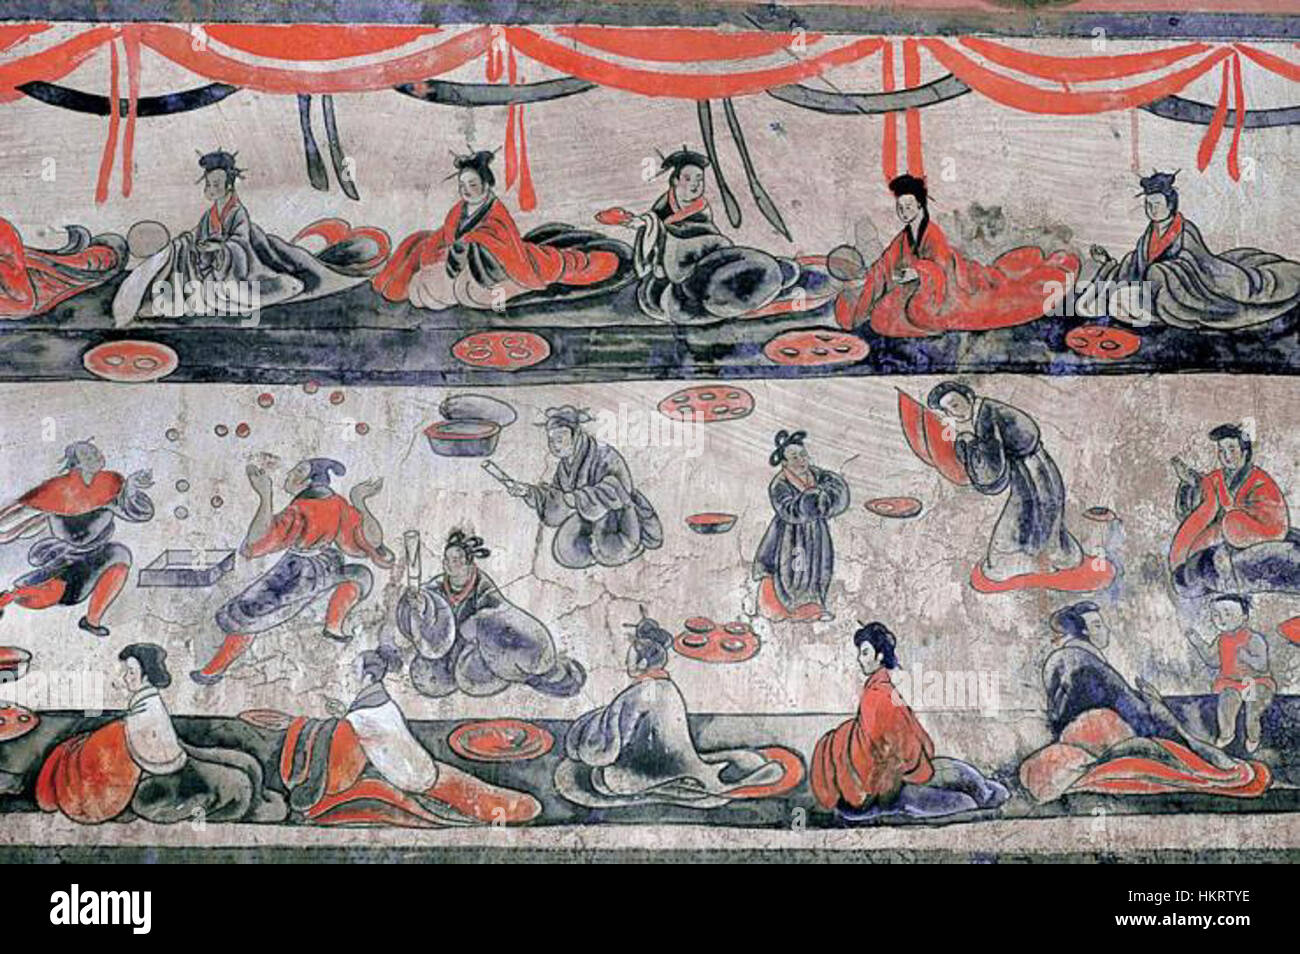 Dahuting tomb banquet scene with jugglers, Eastern Han Dynasty, mural Stock Photo